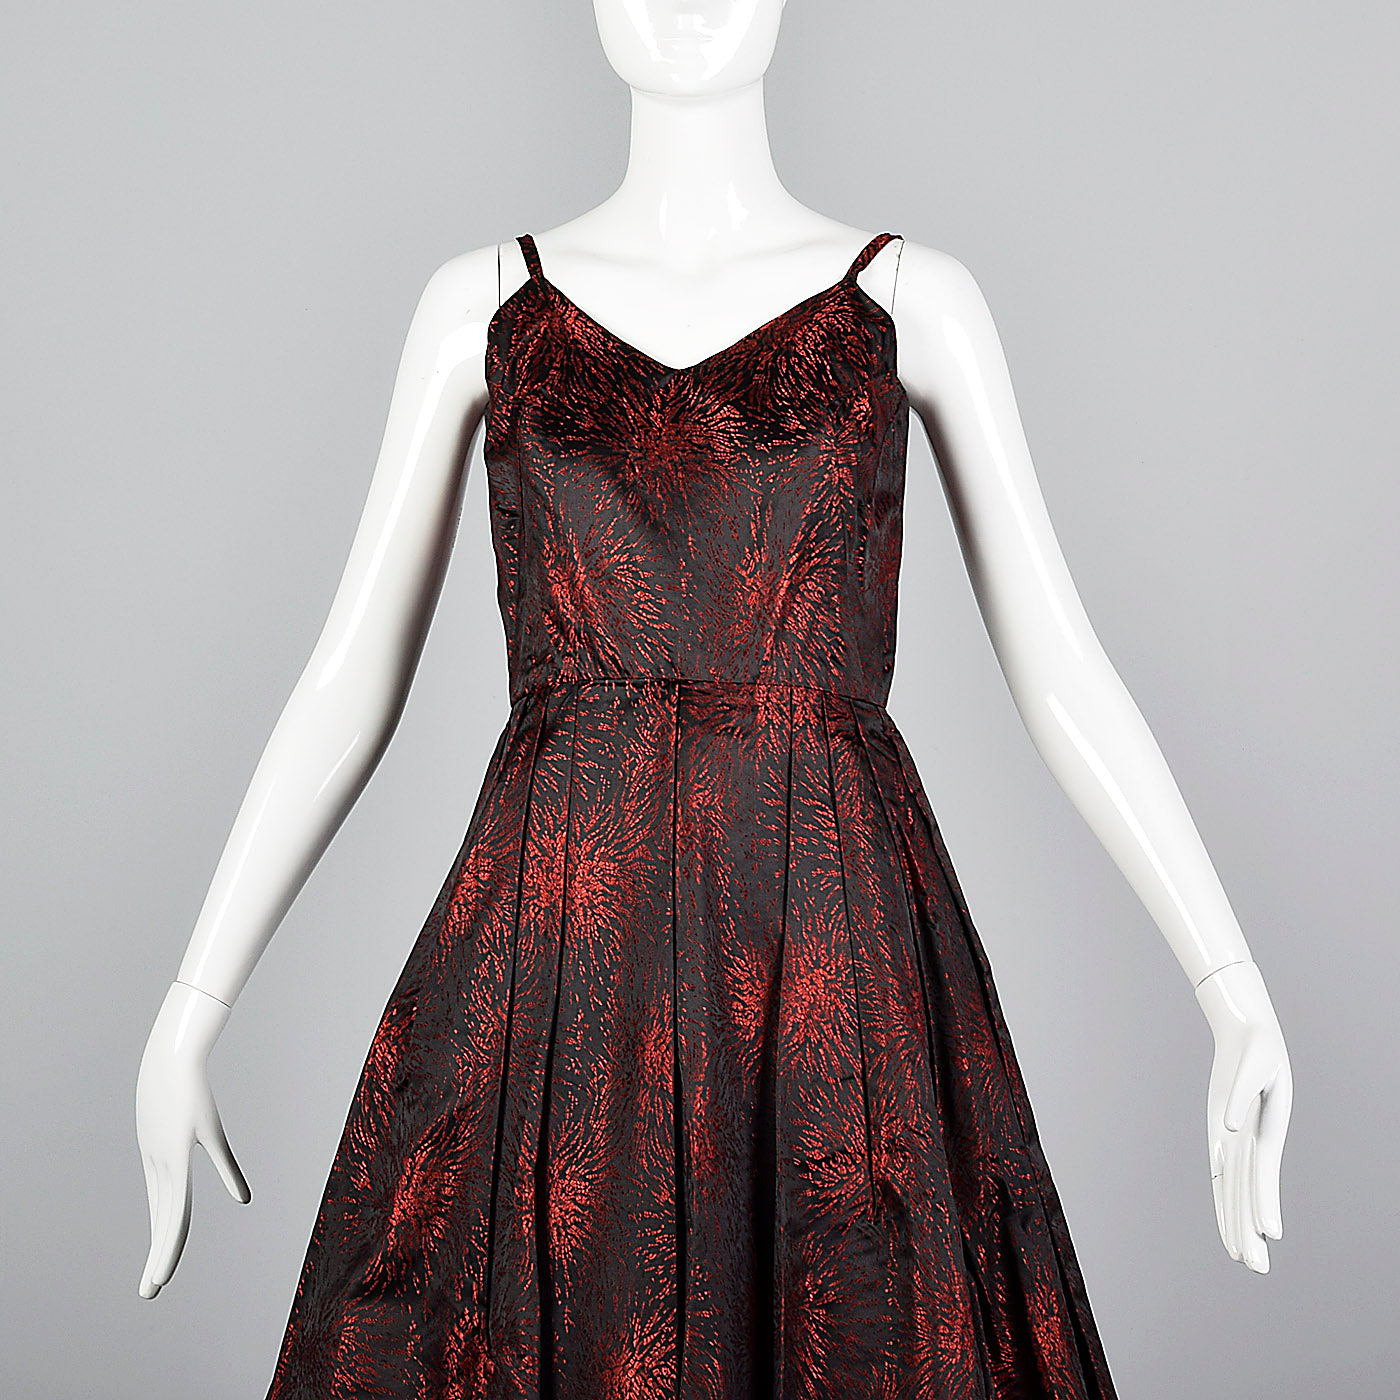 1950s Black and Red Brocade Dress